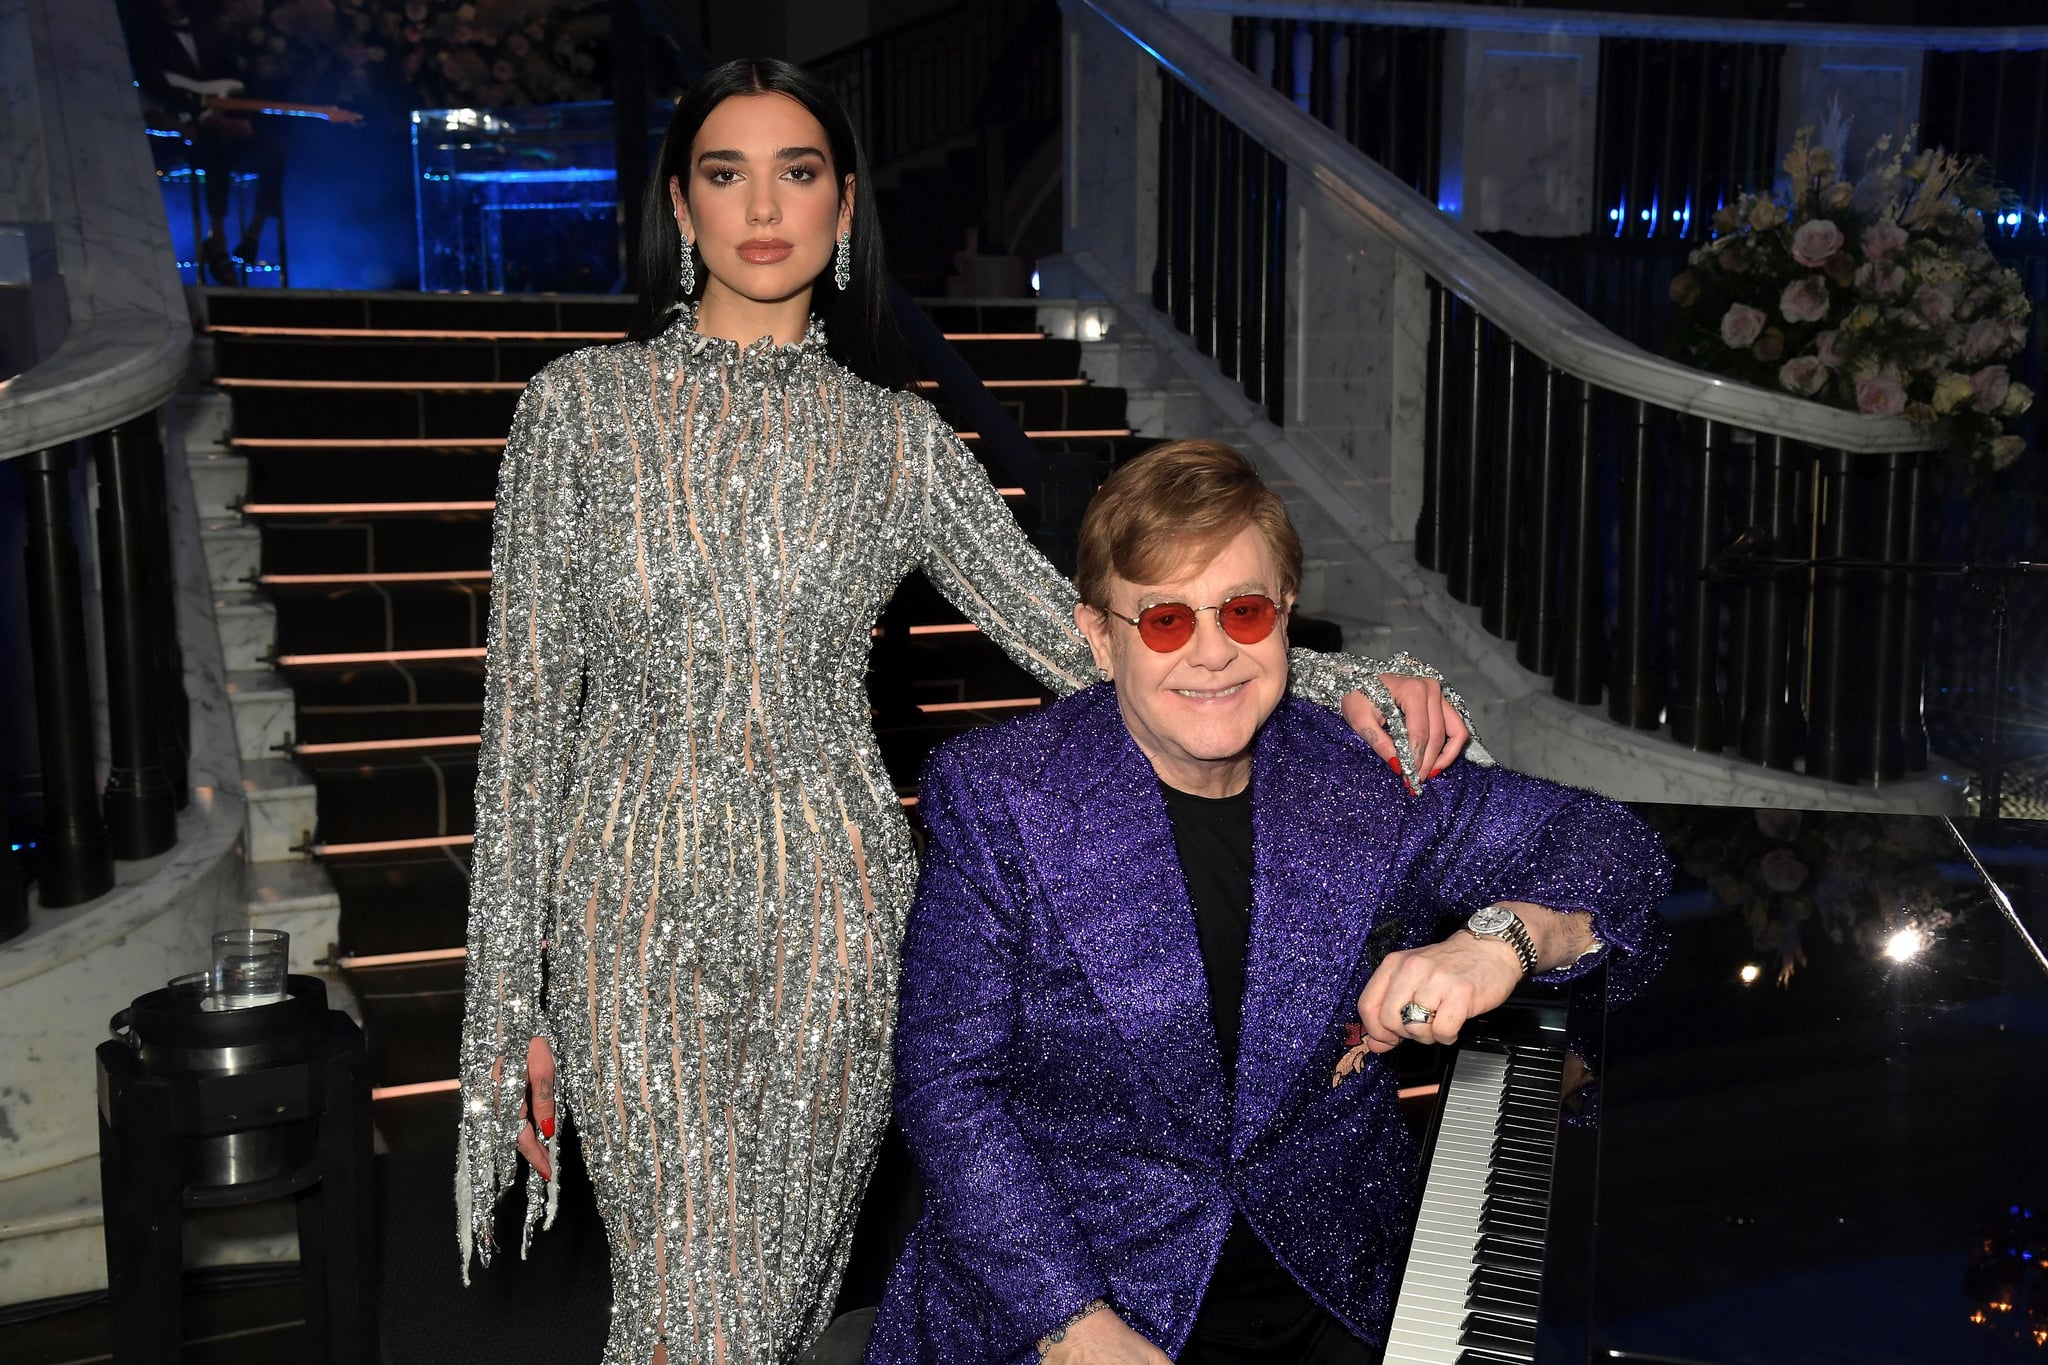 UNSPECIFIED - APRIL 25: In this image released on April 25, (L-R) Dua Lipa and Sir Elton John attend the 29th Annual Elton John AIDS Foundation Academy Awards Viewing Party on April 25, 2021. (Photo by David M. Benett/Getty Images for the Elton John AIDS Foundation)